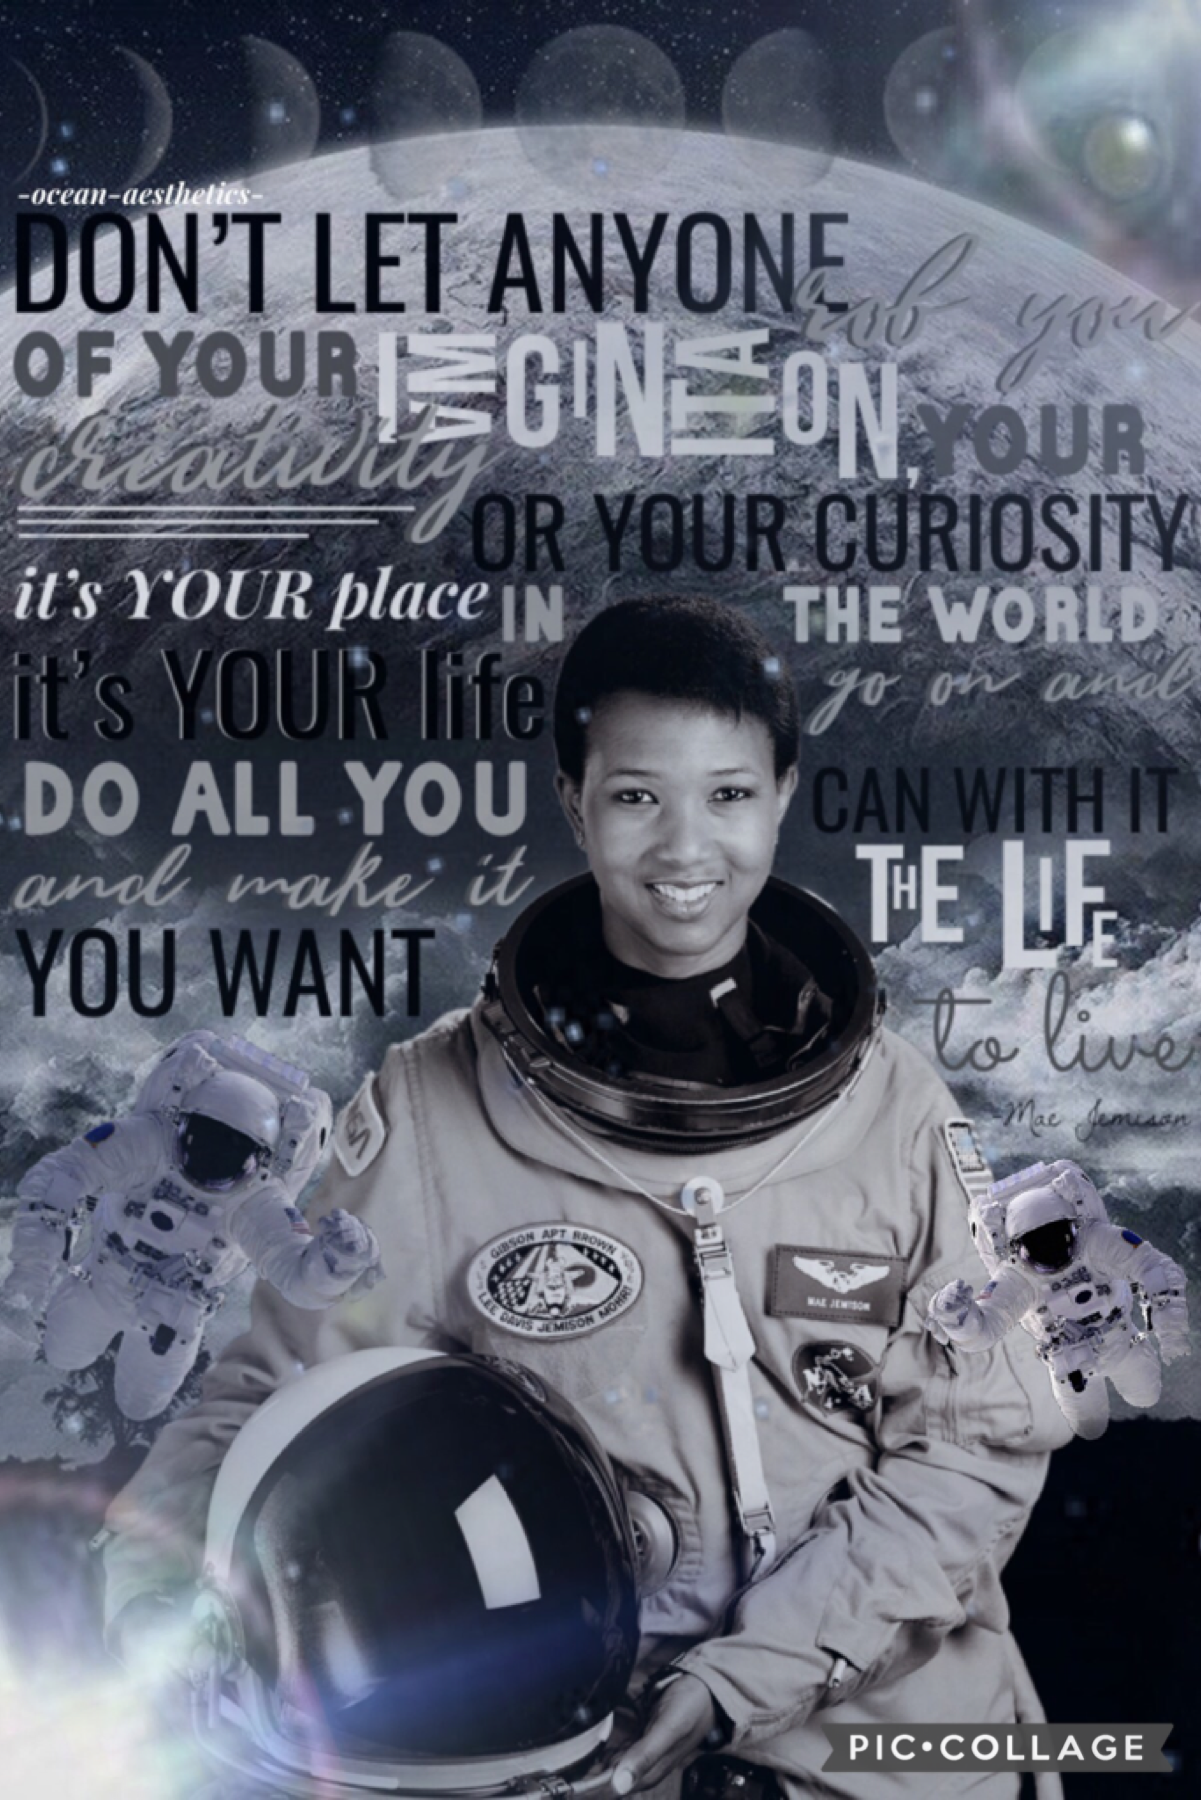 🔭-28/2/2021-🔭
My Black History Month inspired collage! The last one in this series! I chose Mae Jemison who for me is such an inspiration! Check the remixes for a little fact file about her! I really hope you’ve enjoyed this series as much as I have! A ma